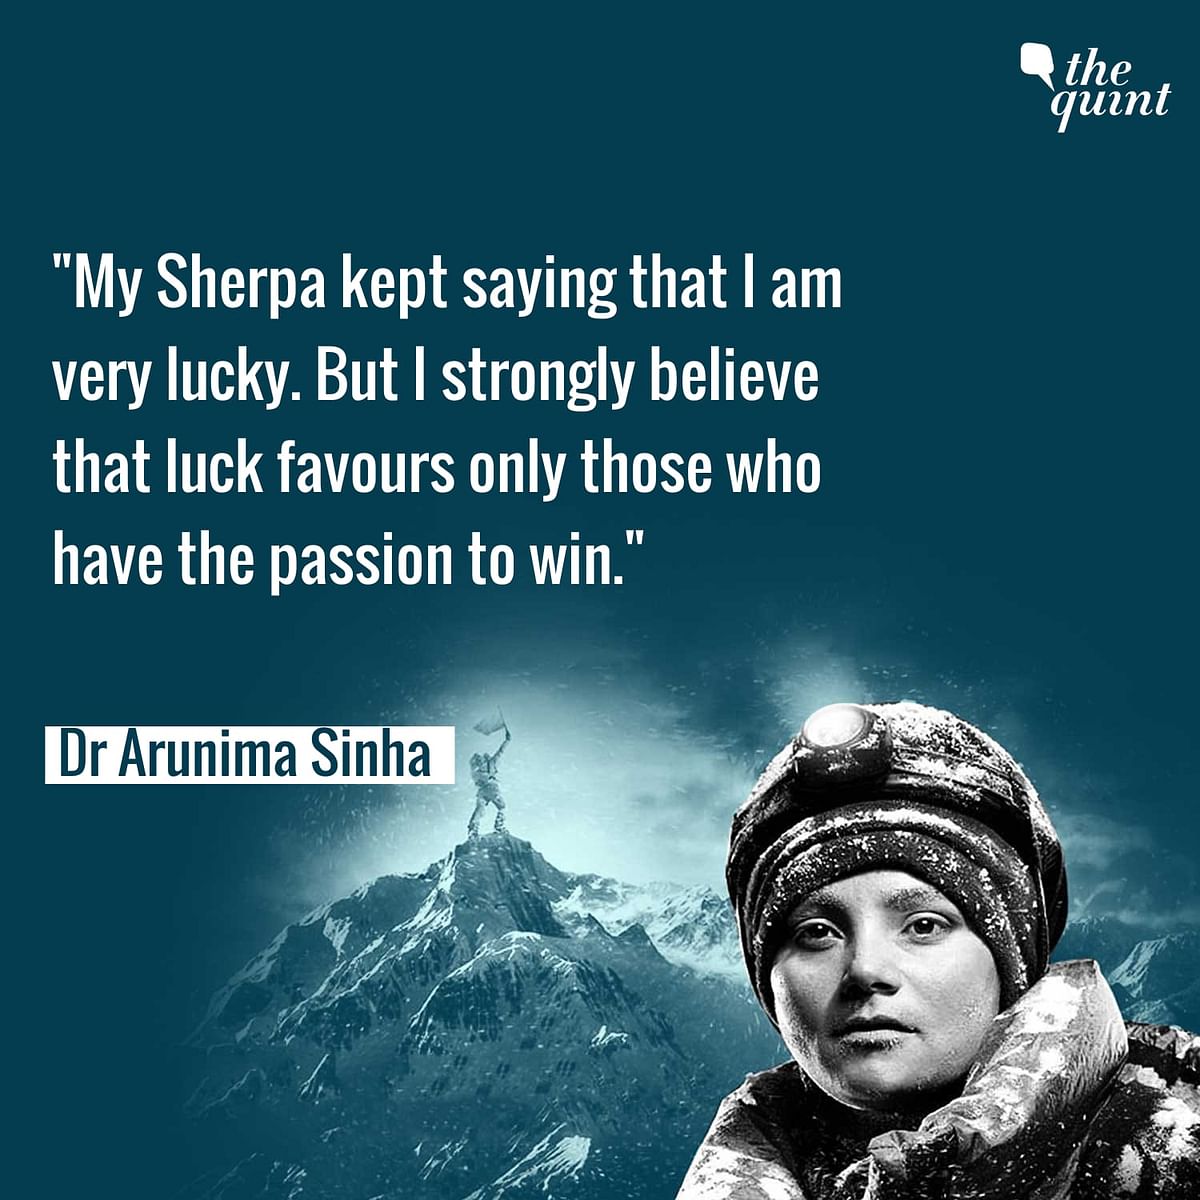 A terrible accident, a shattered dream but she fought back. Arunima won six world records in six years.